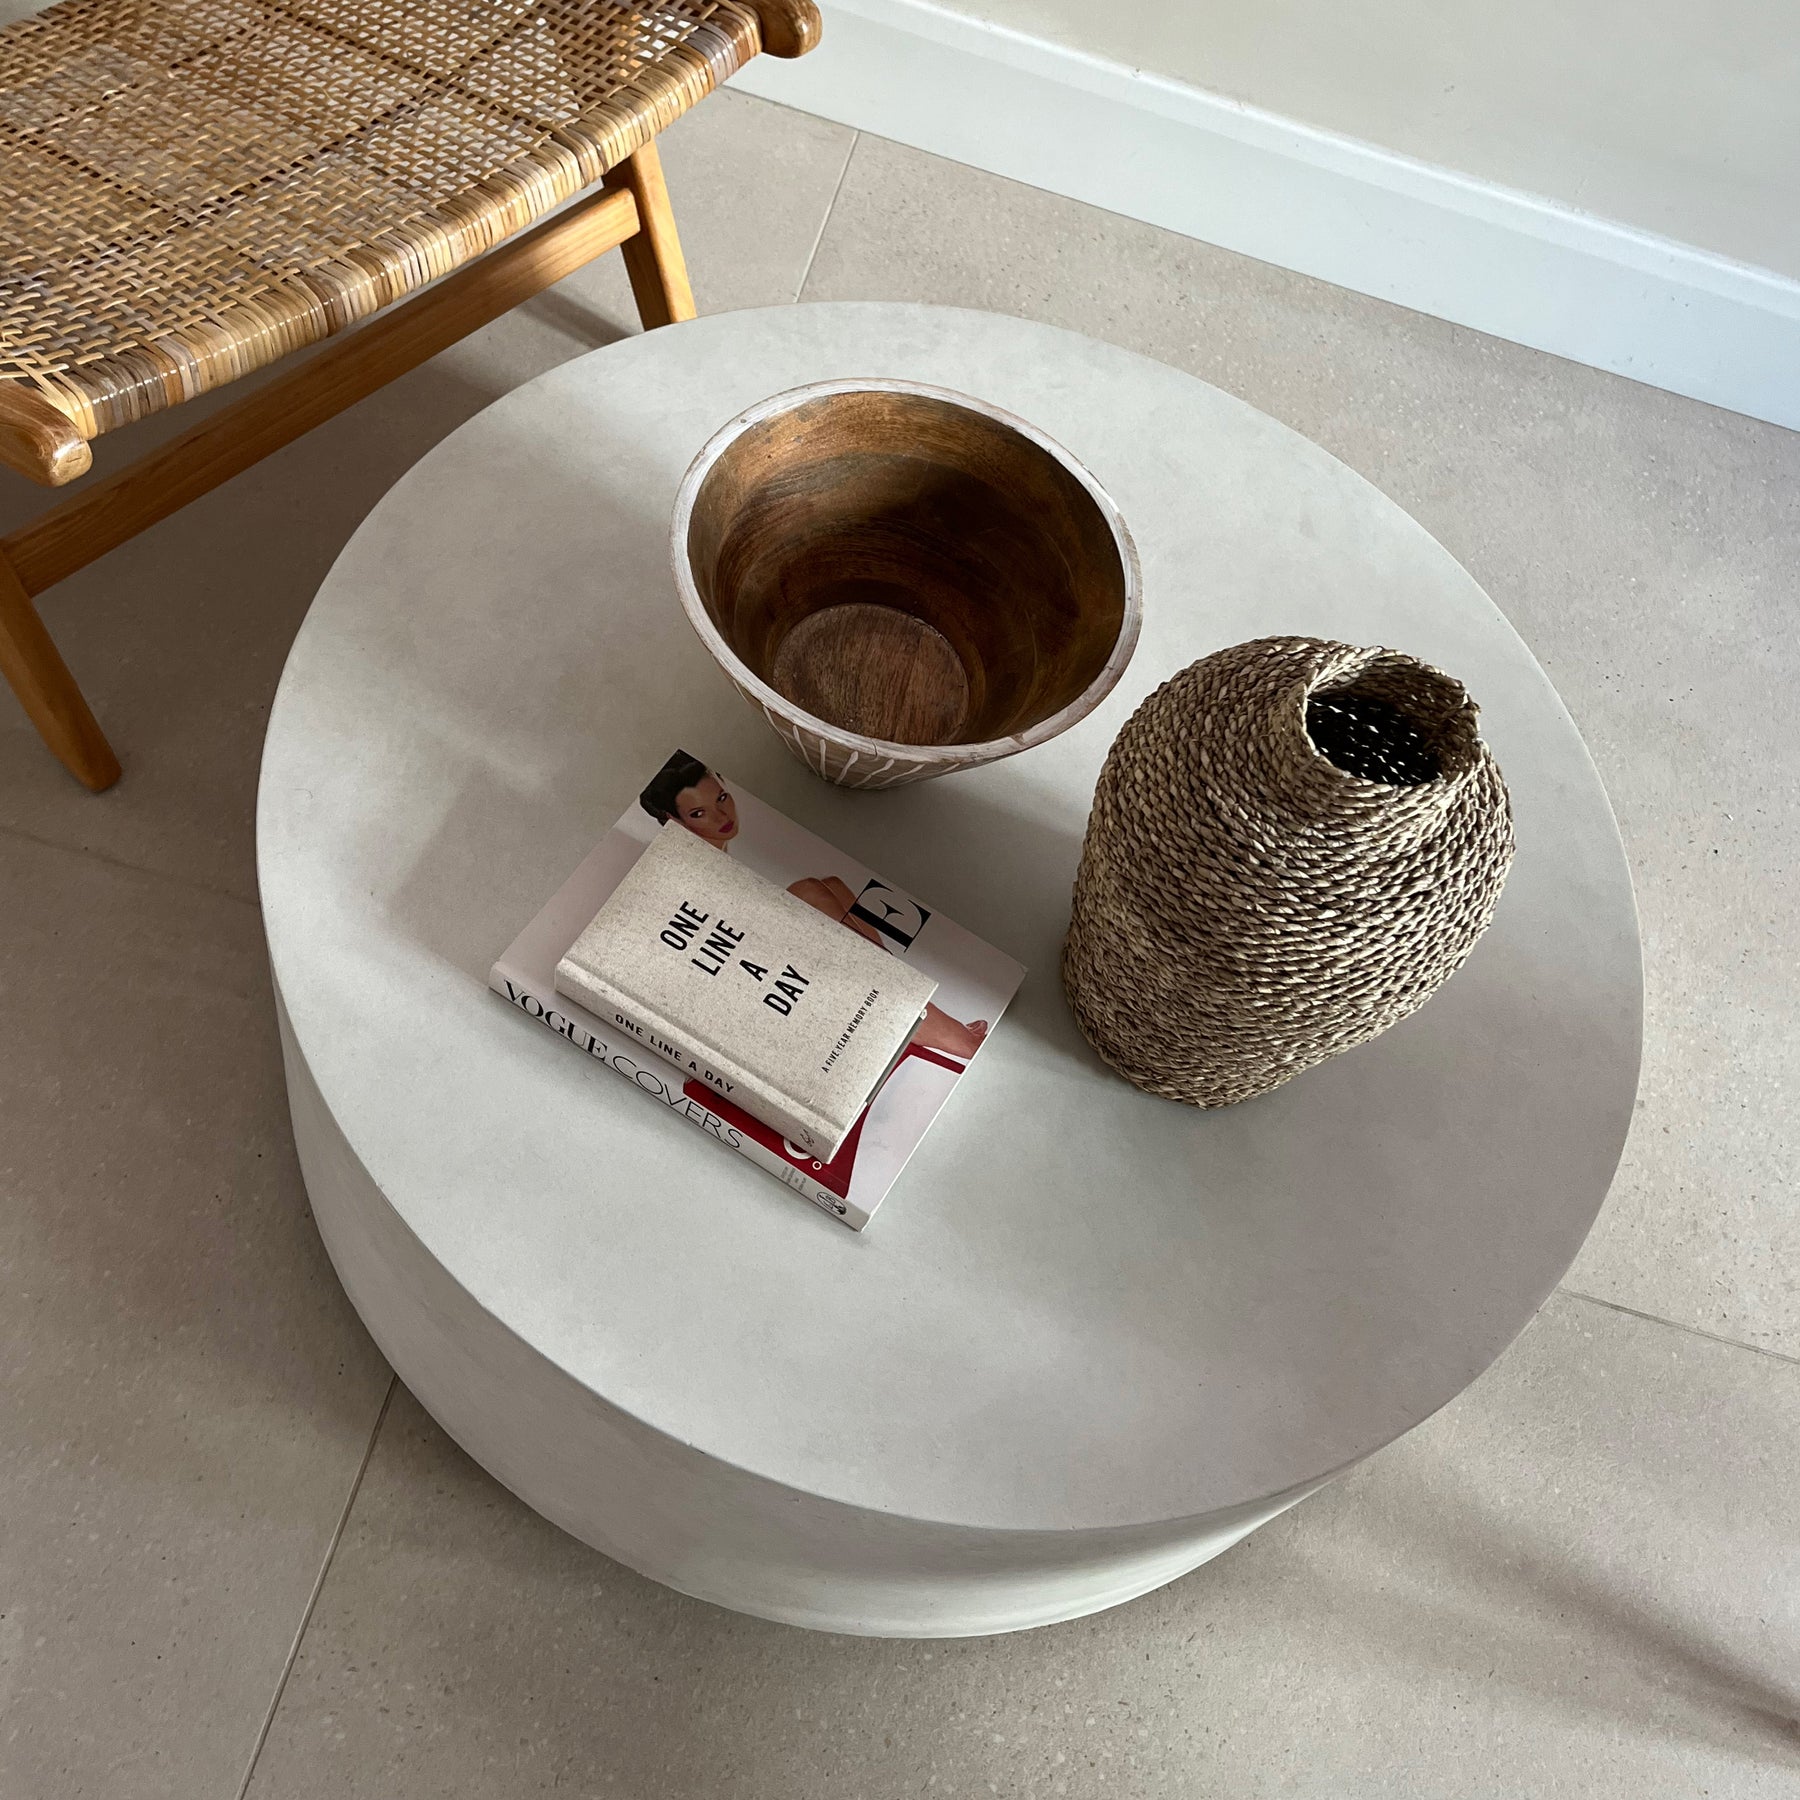 Large minimalist concrete round coffee table adorned with books, basket, and bowl